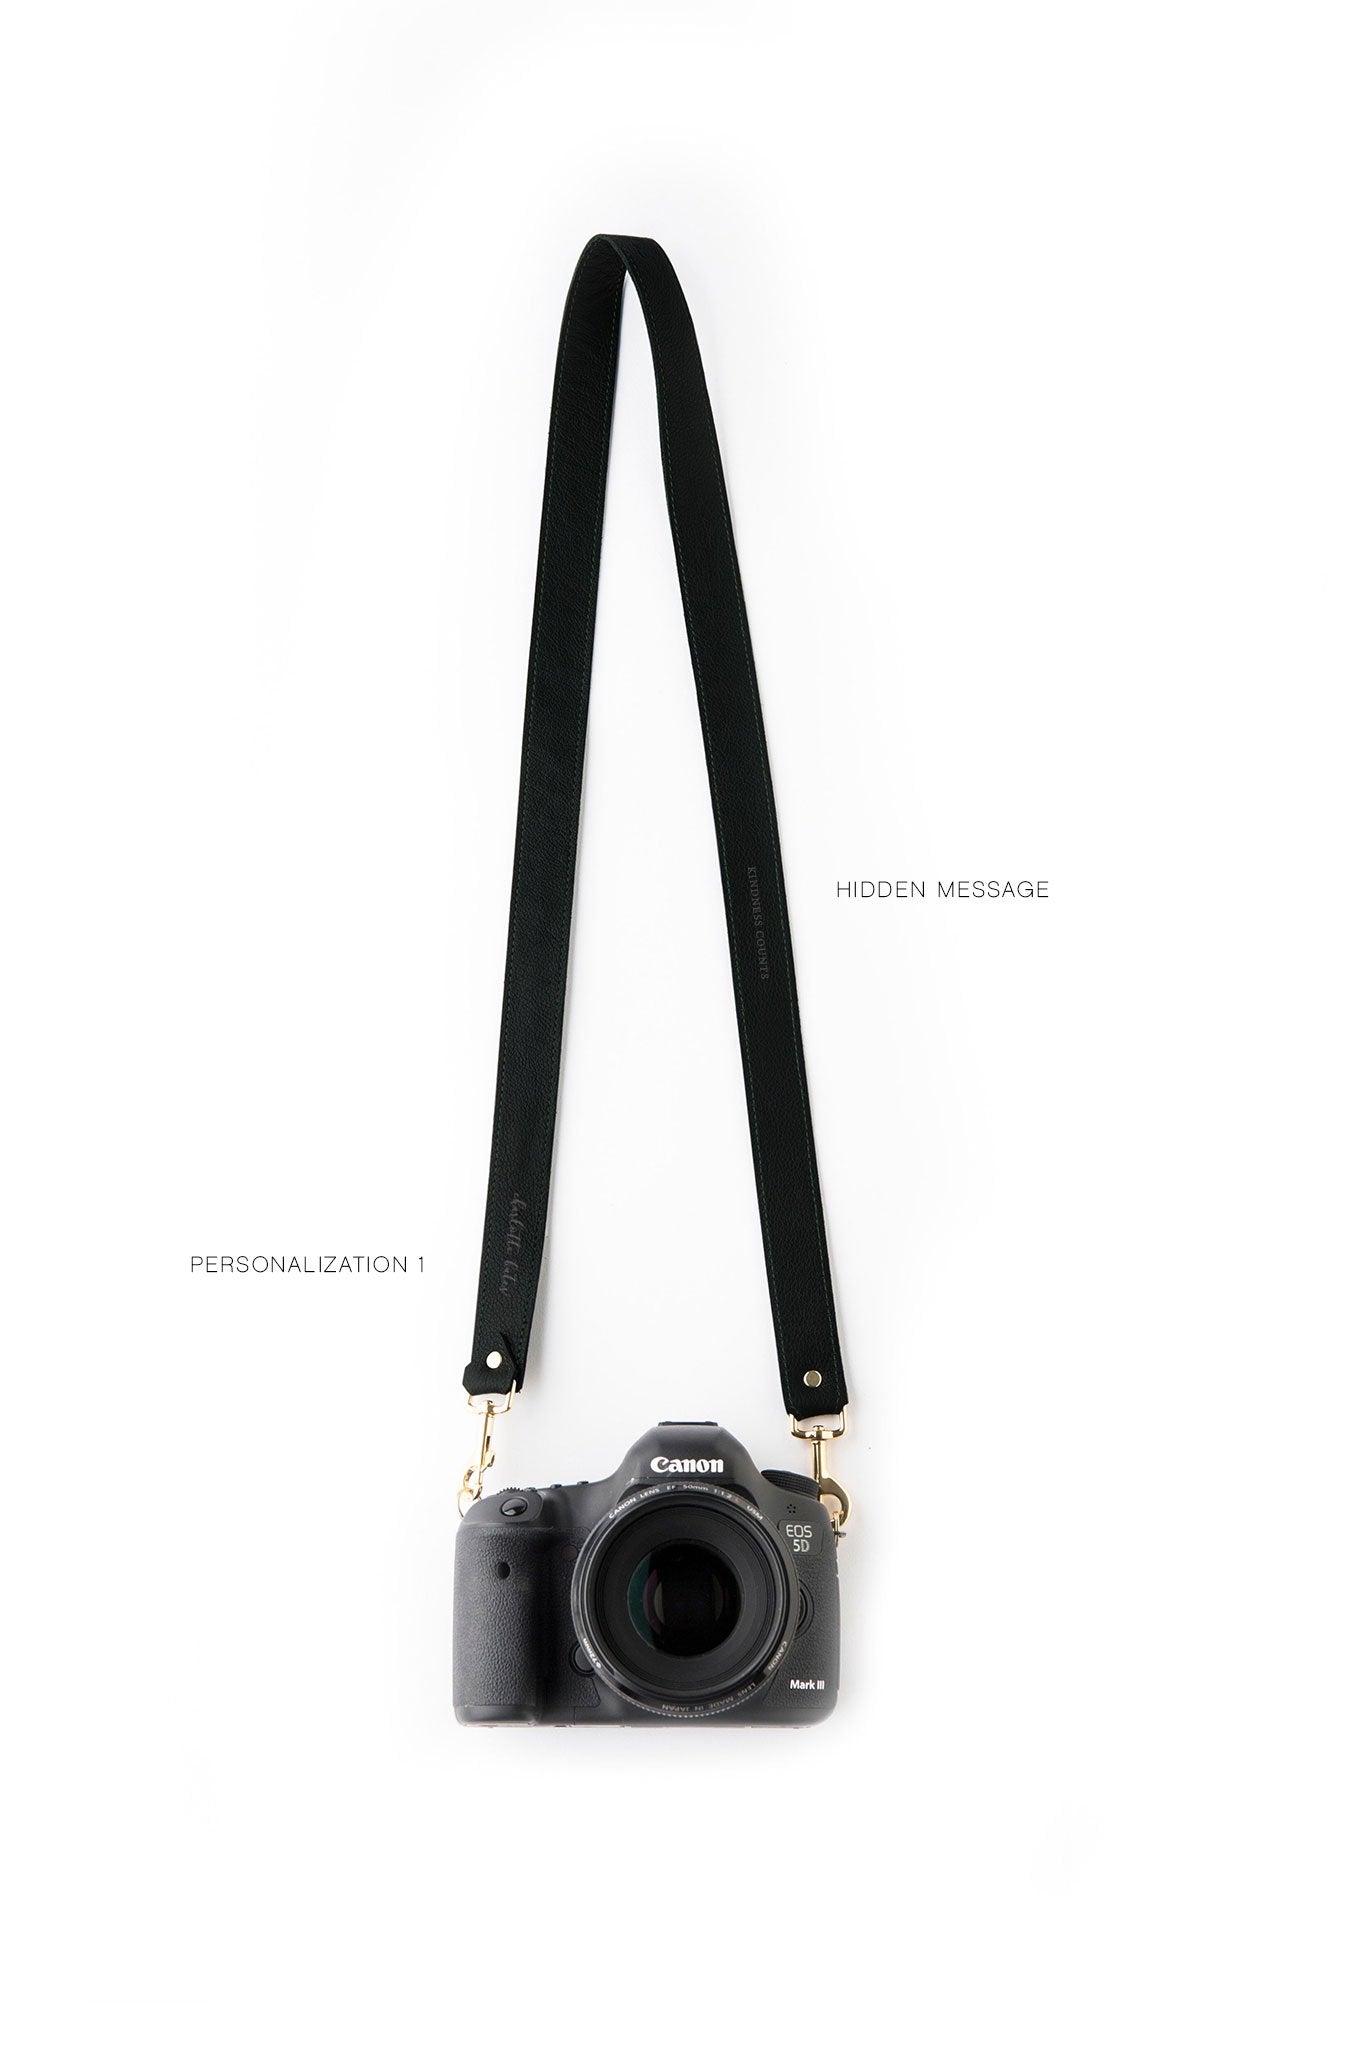 FOTO | The Designer in Black - a black genuine pebbled leather camera strap that can be personalized with a monogram or business logo, making this leather camera strap the perfect personalized gift.